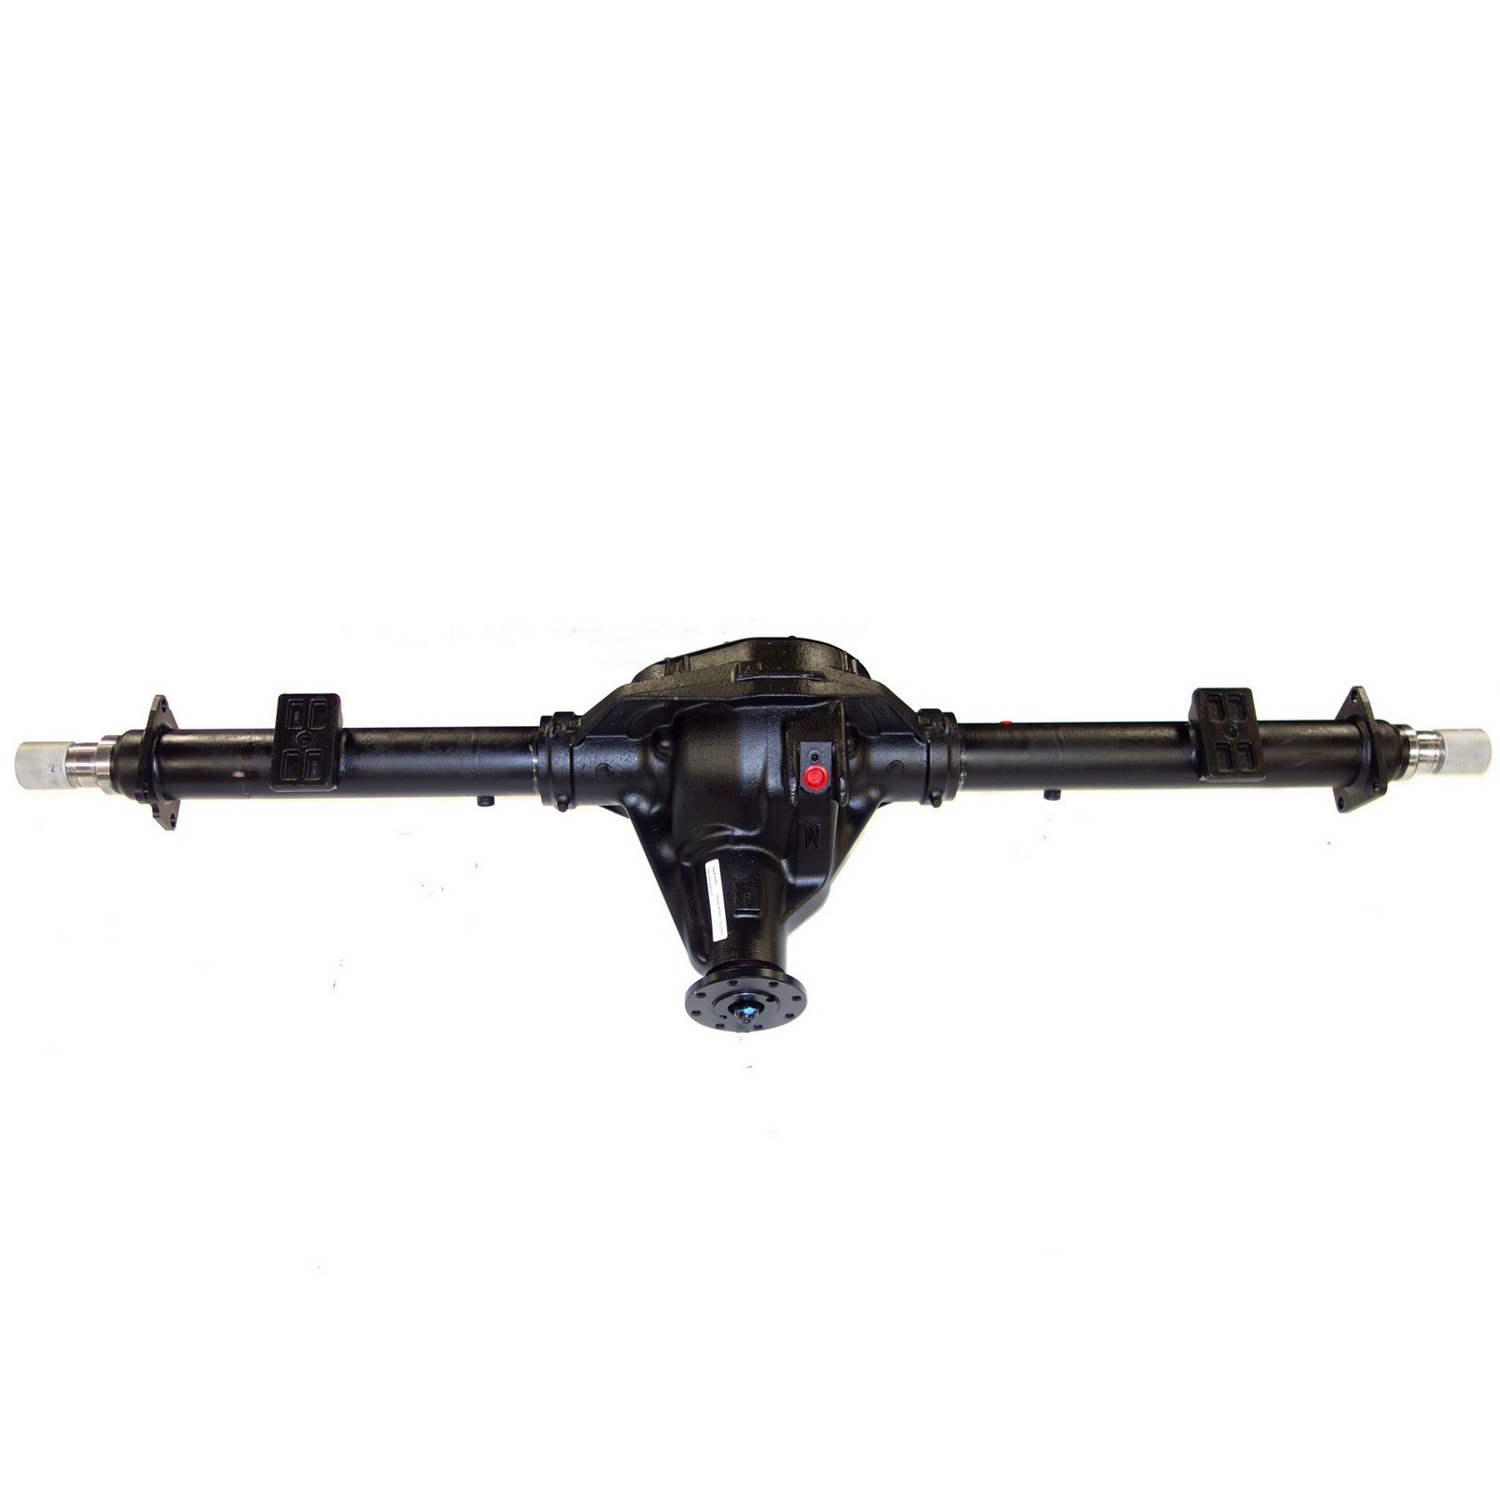 Remanufactured Axle Assy for 10.5" 1999 F250 & F350 4.30, SRW, Posi LSD *Check Tag*